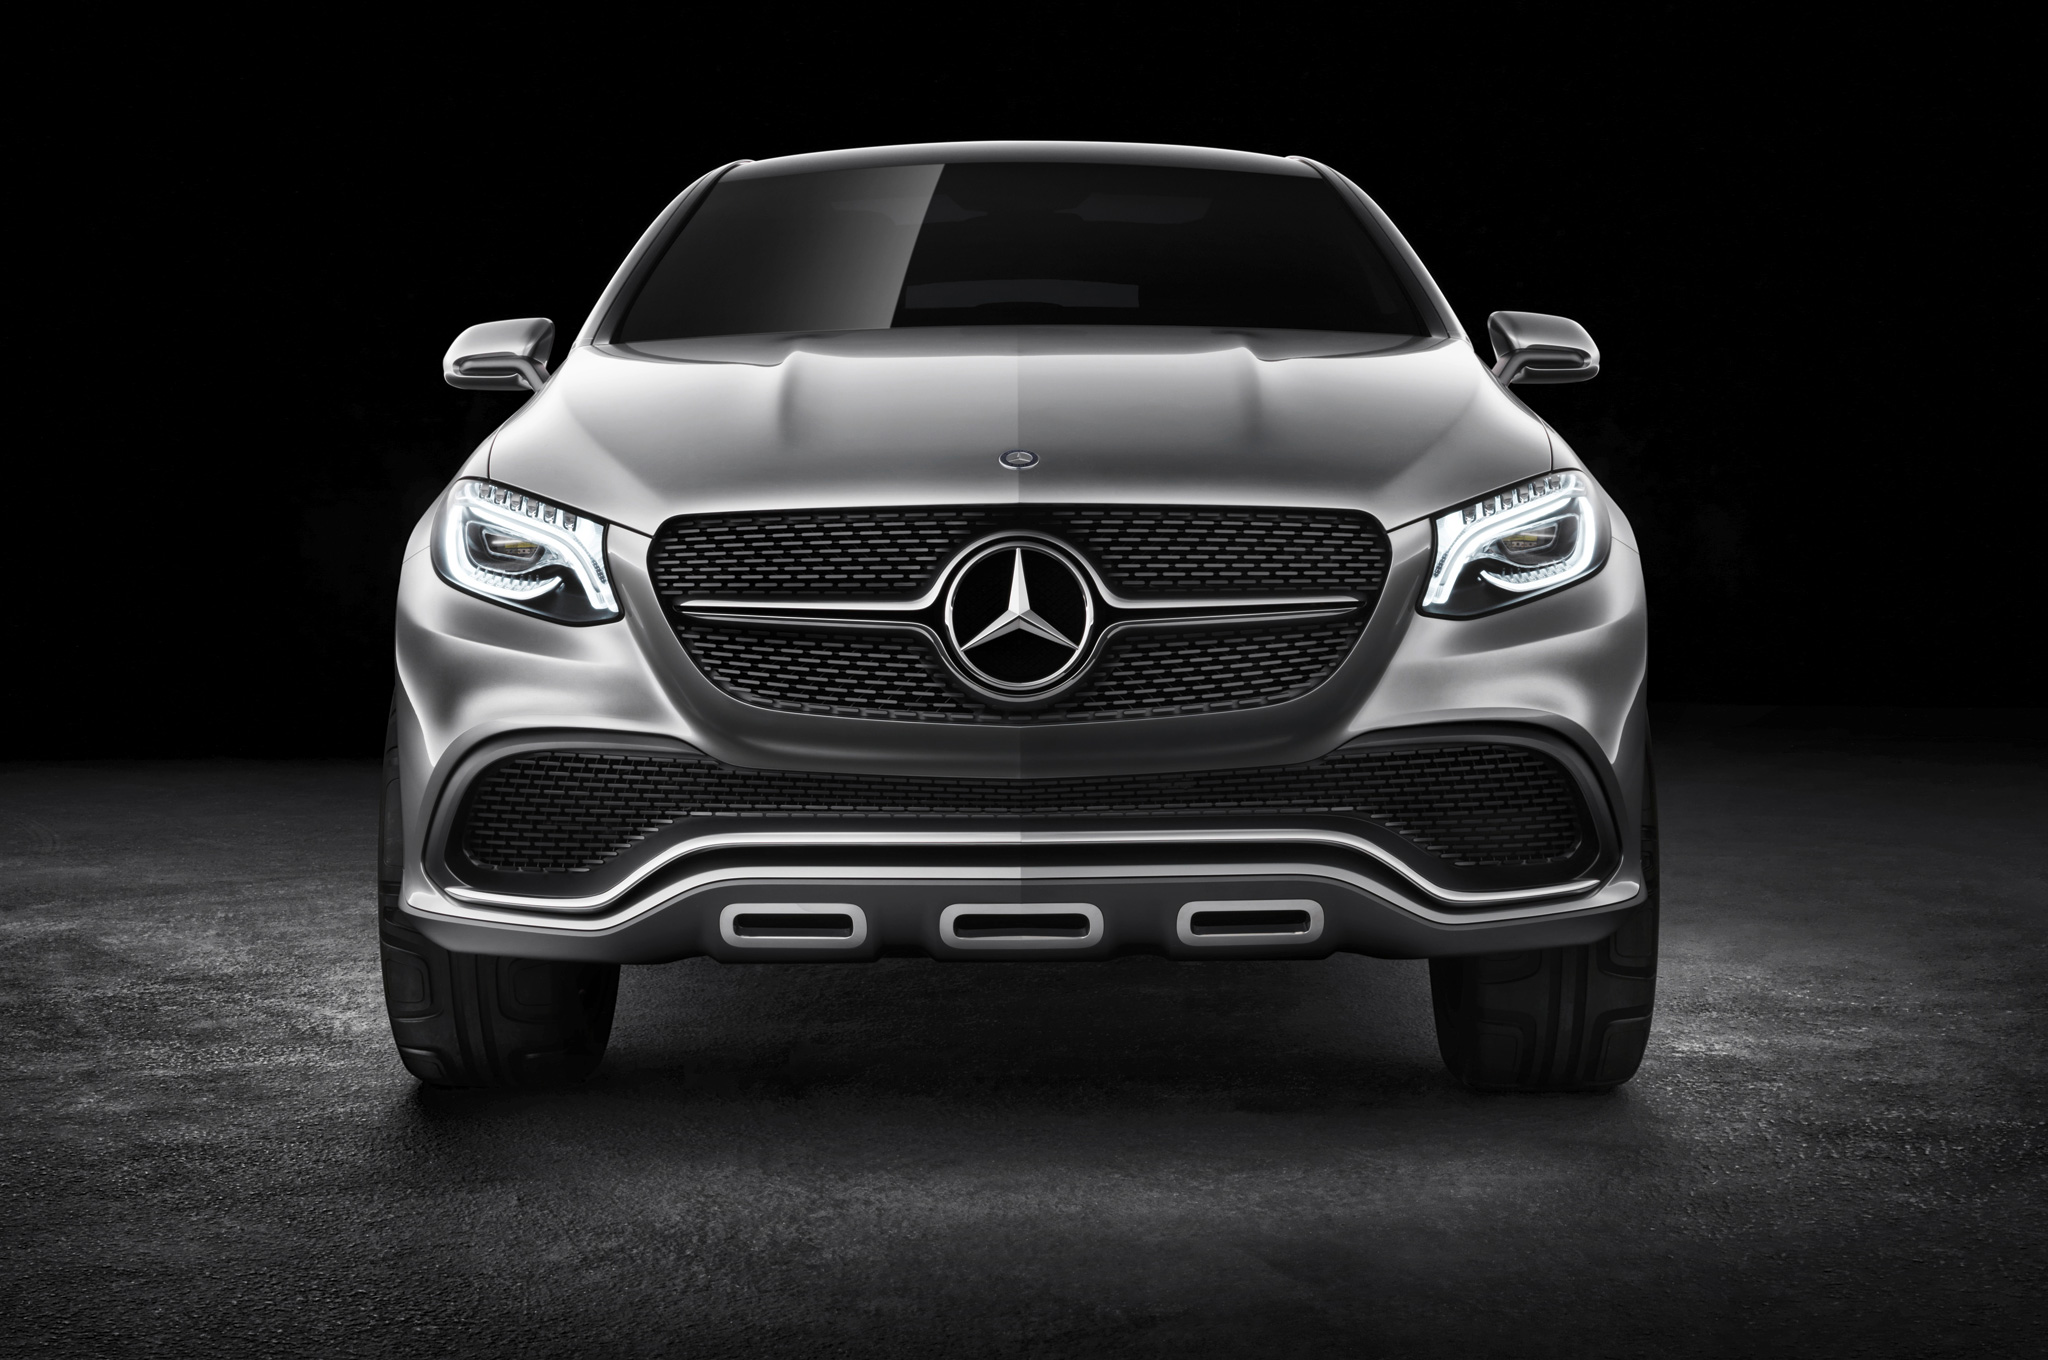 Mercedes-Benz-Concept-Coupe-SUV-front-view-studio.jpg